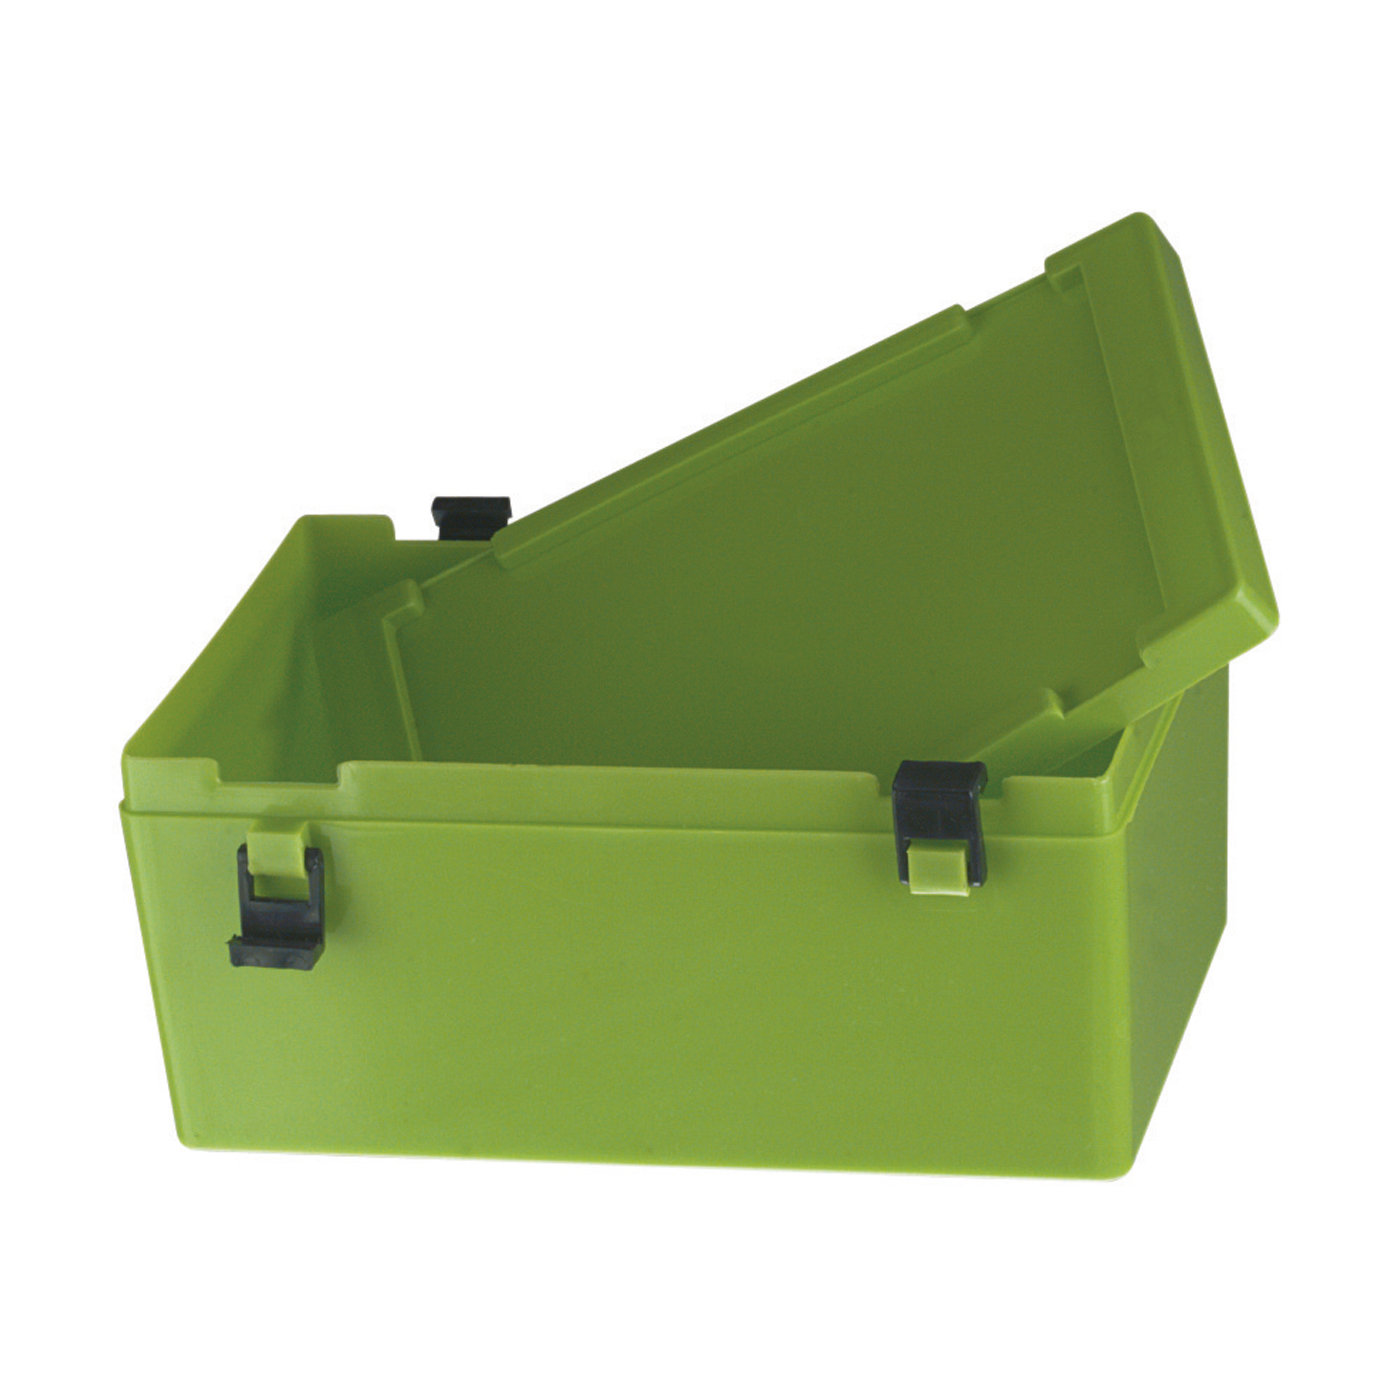 Dispatch Container, 1.3 l, Green - 1 piece